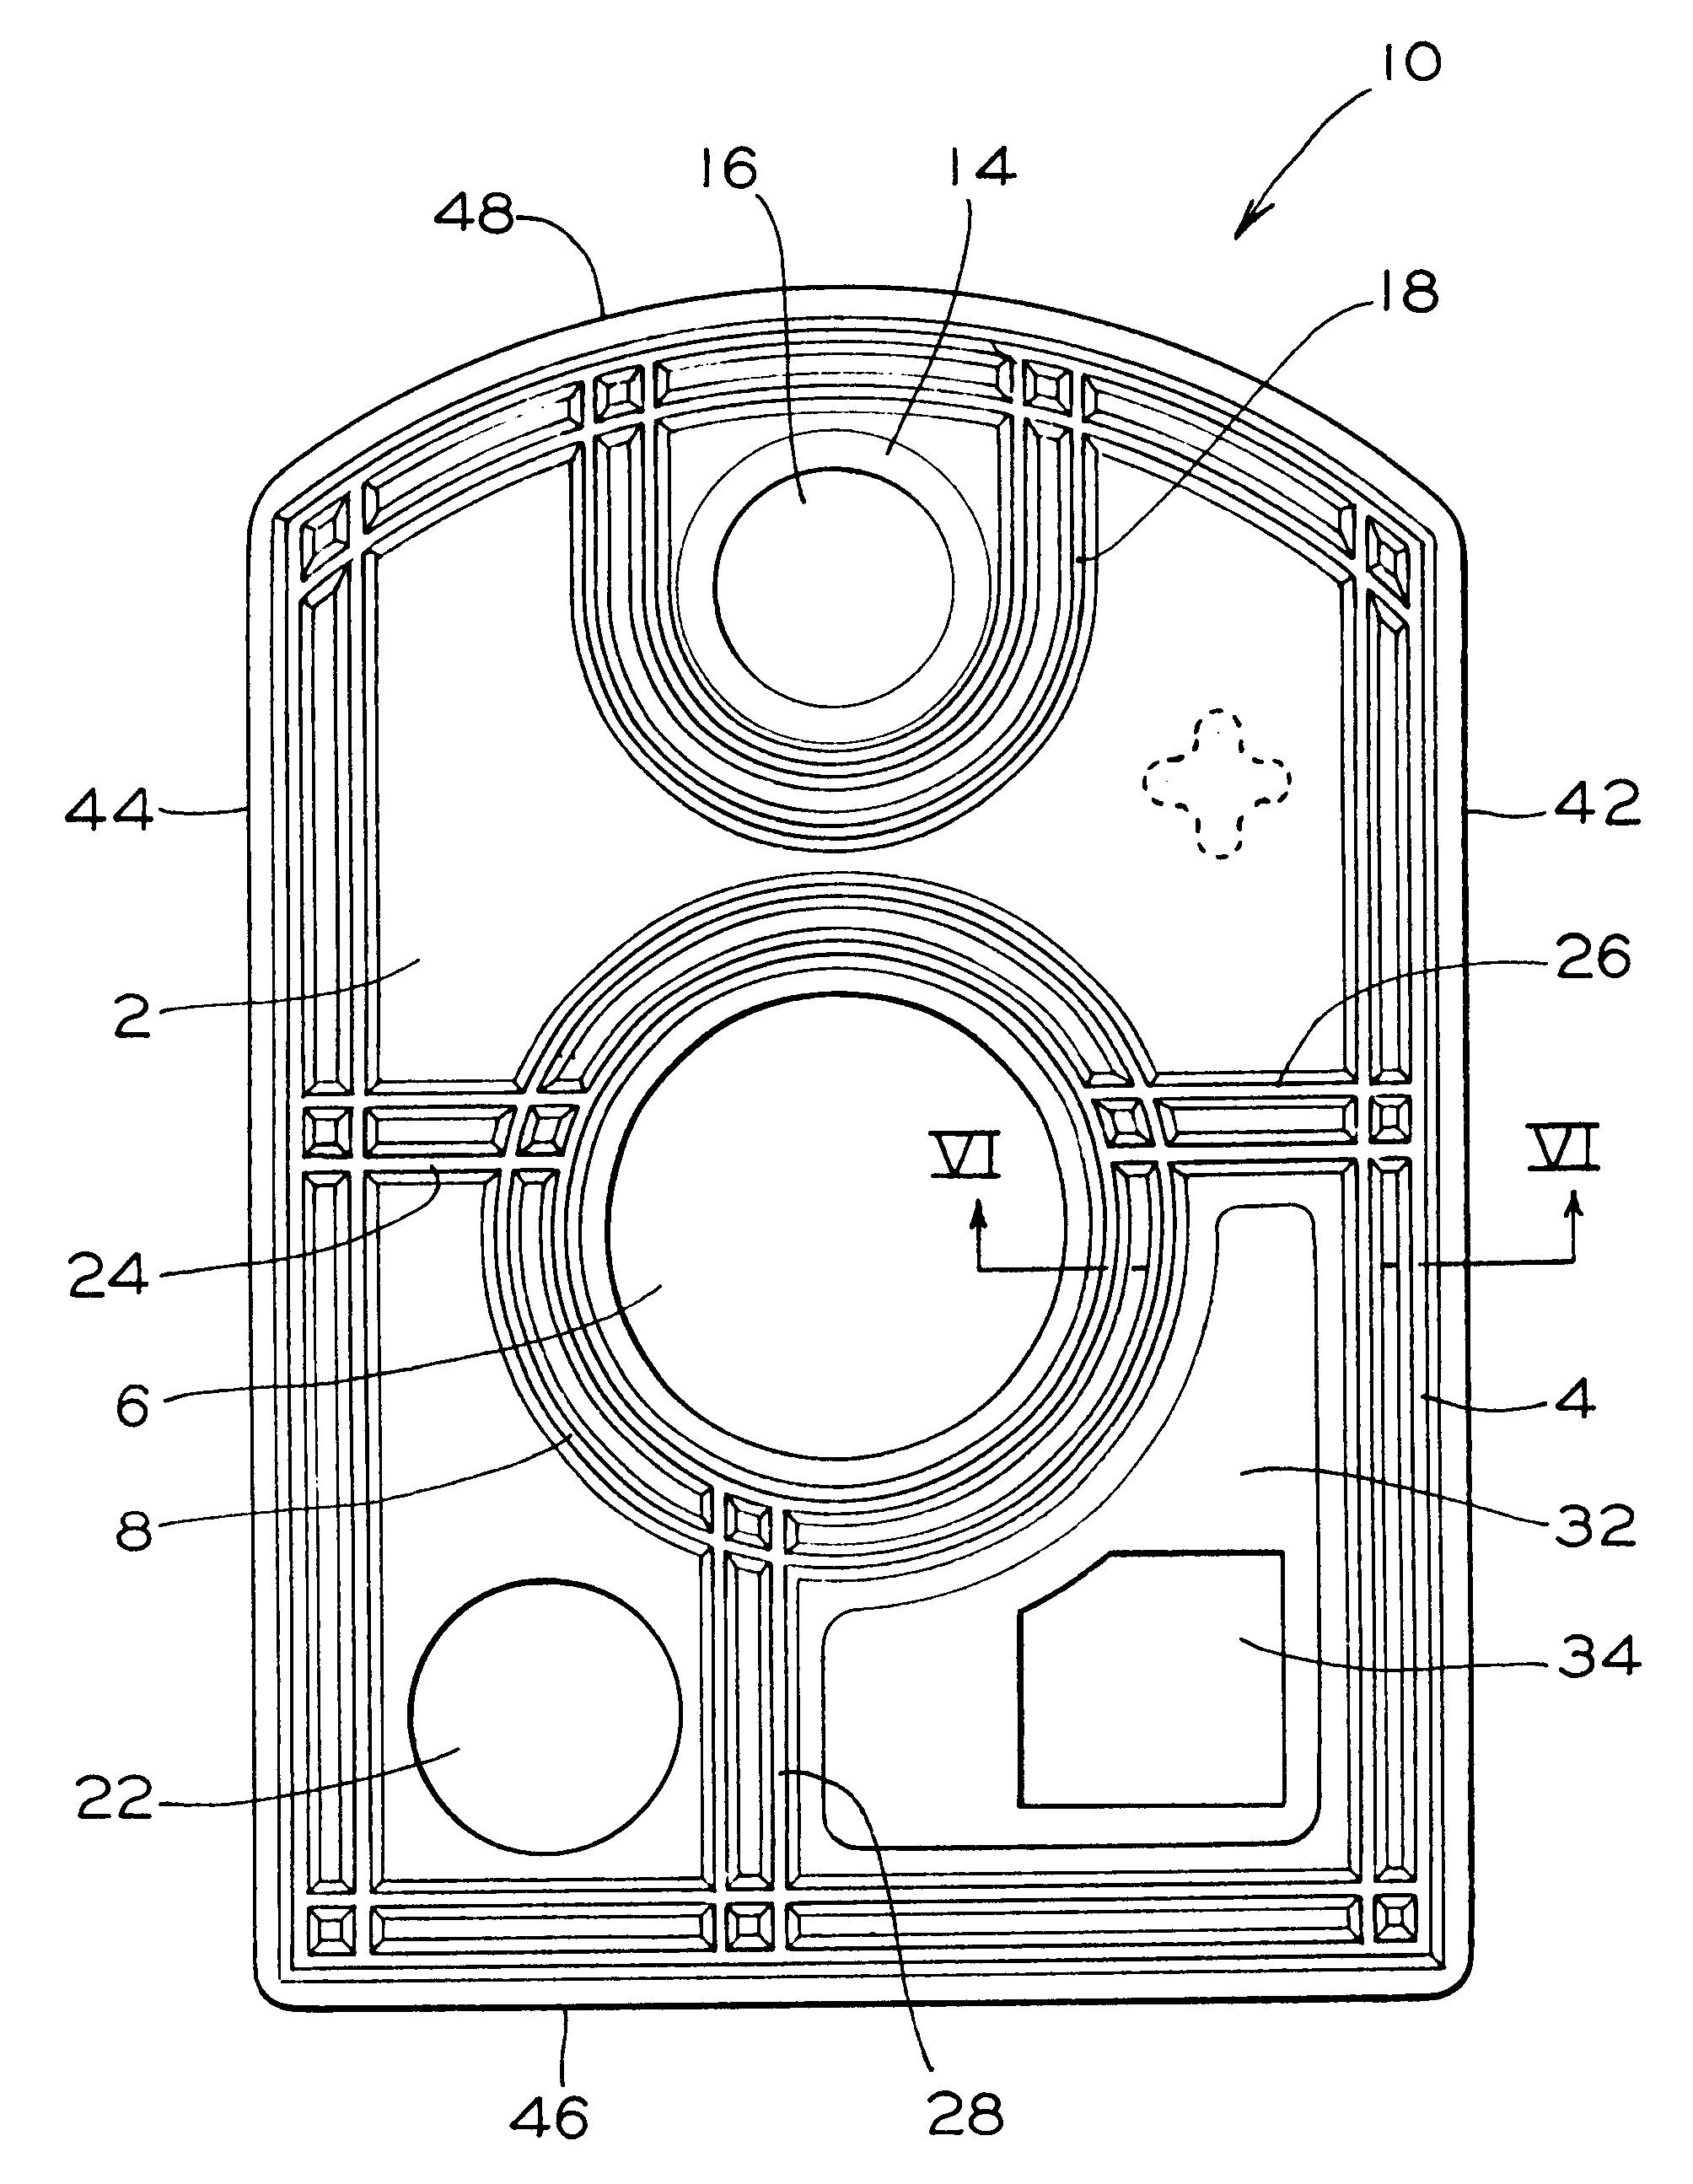 Brass insert molded into "church window" of service accelerated release valve gasket